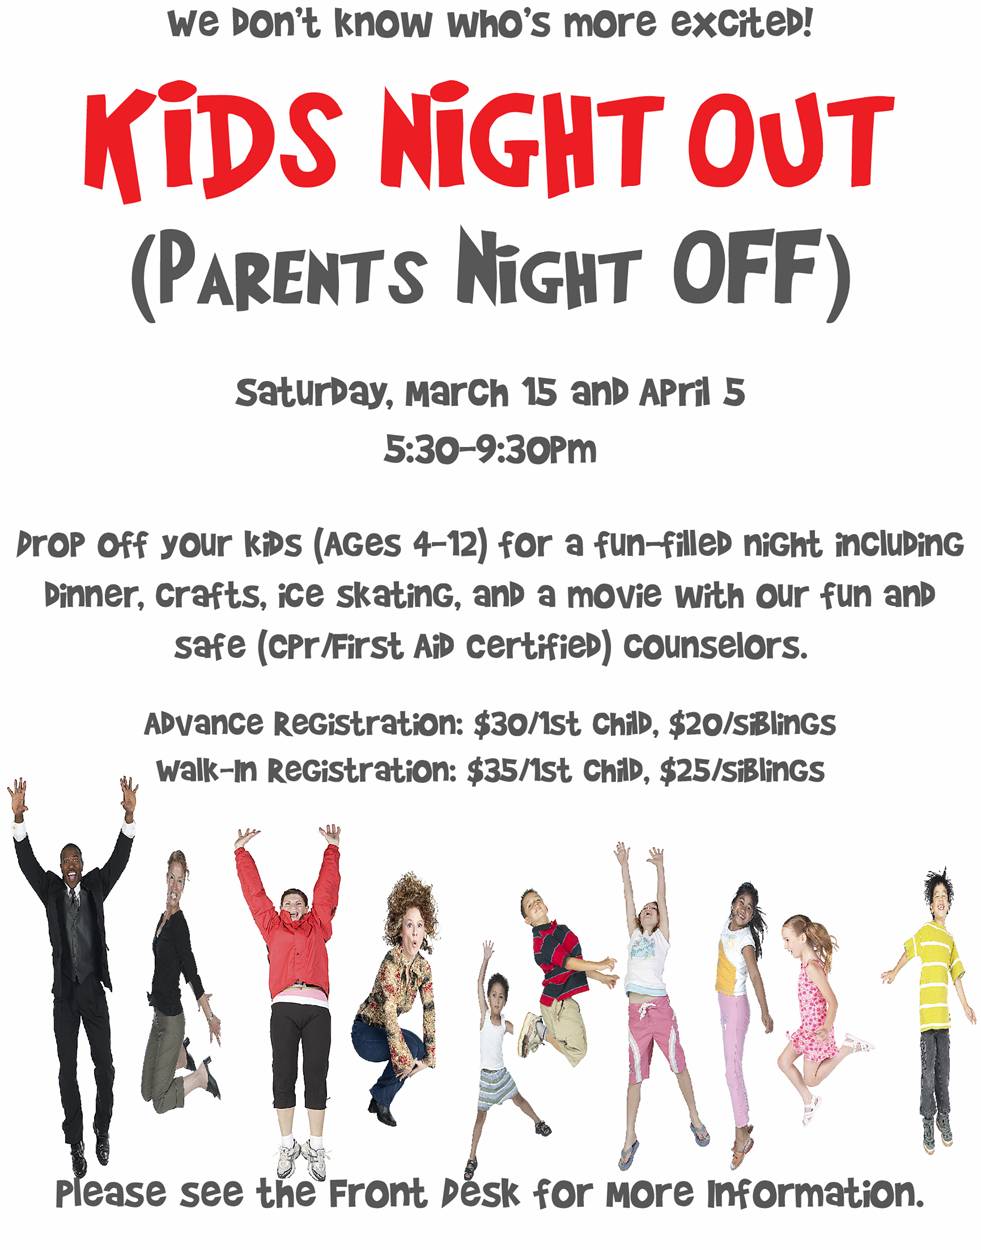 Parents Night Out Images Kids Night Out  Parents Night